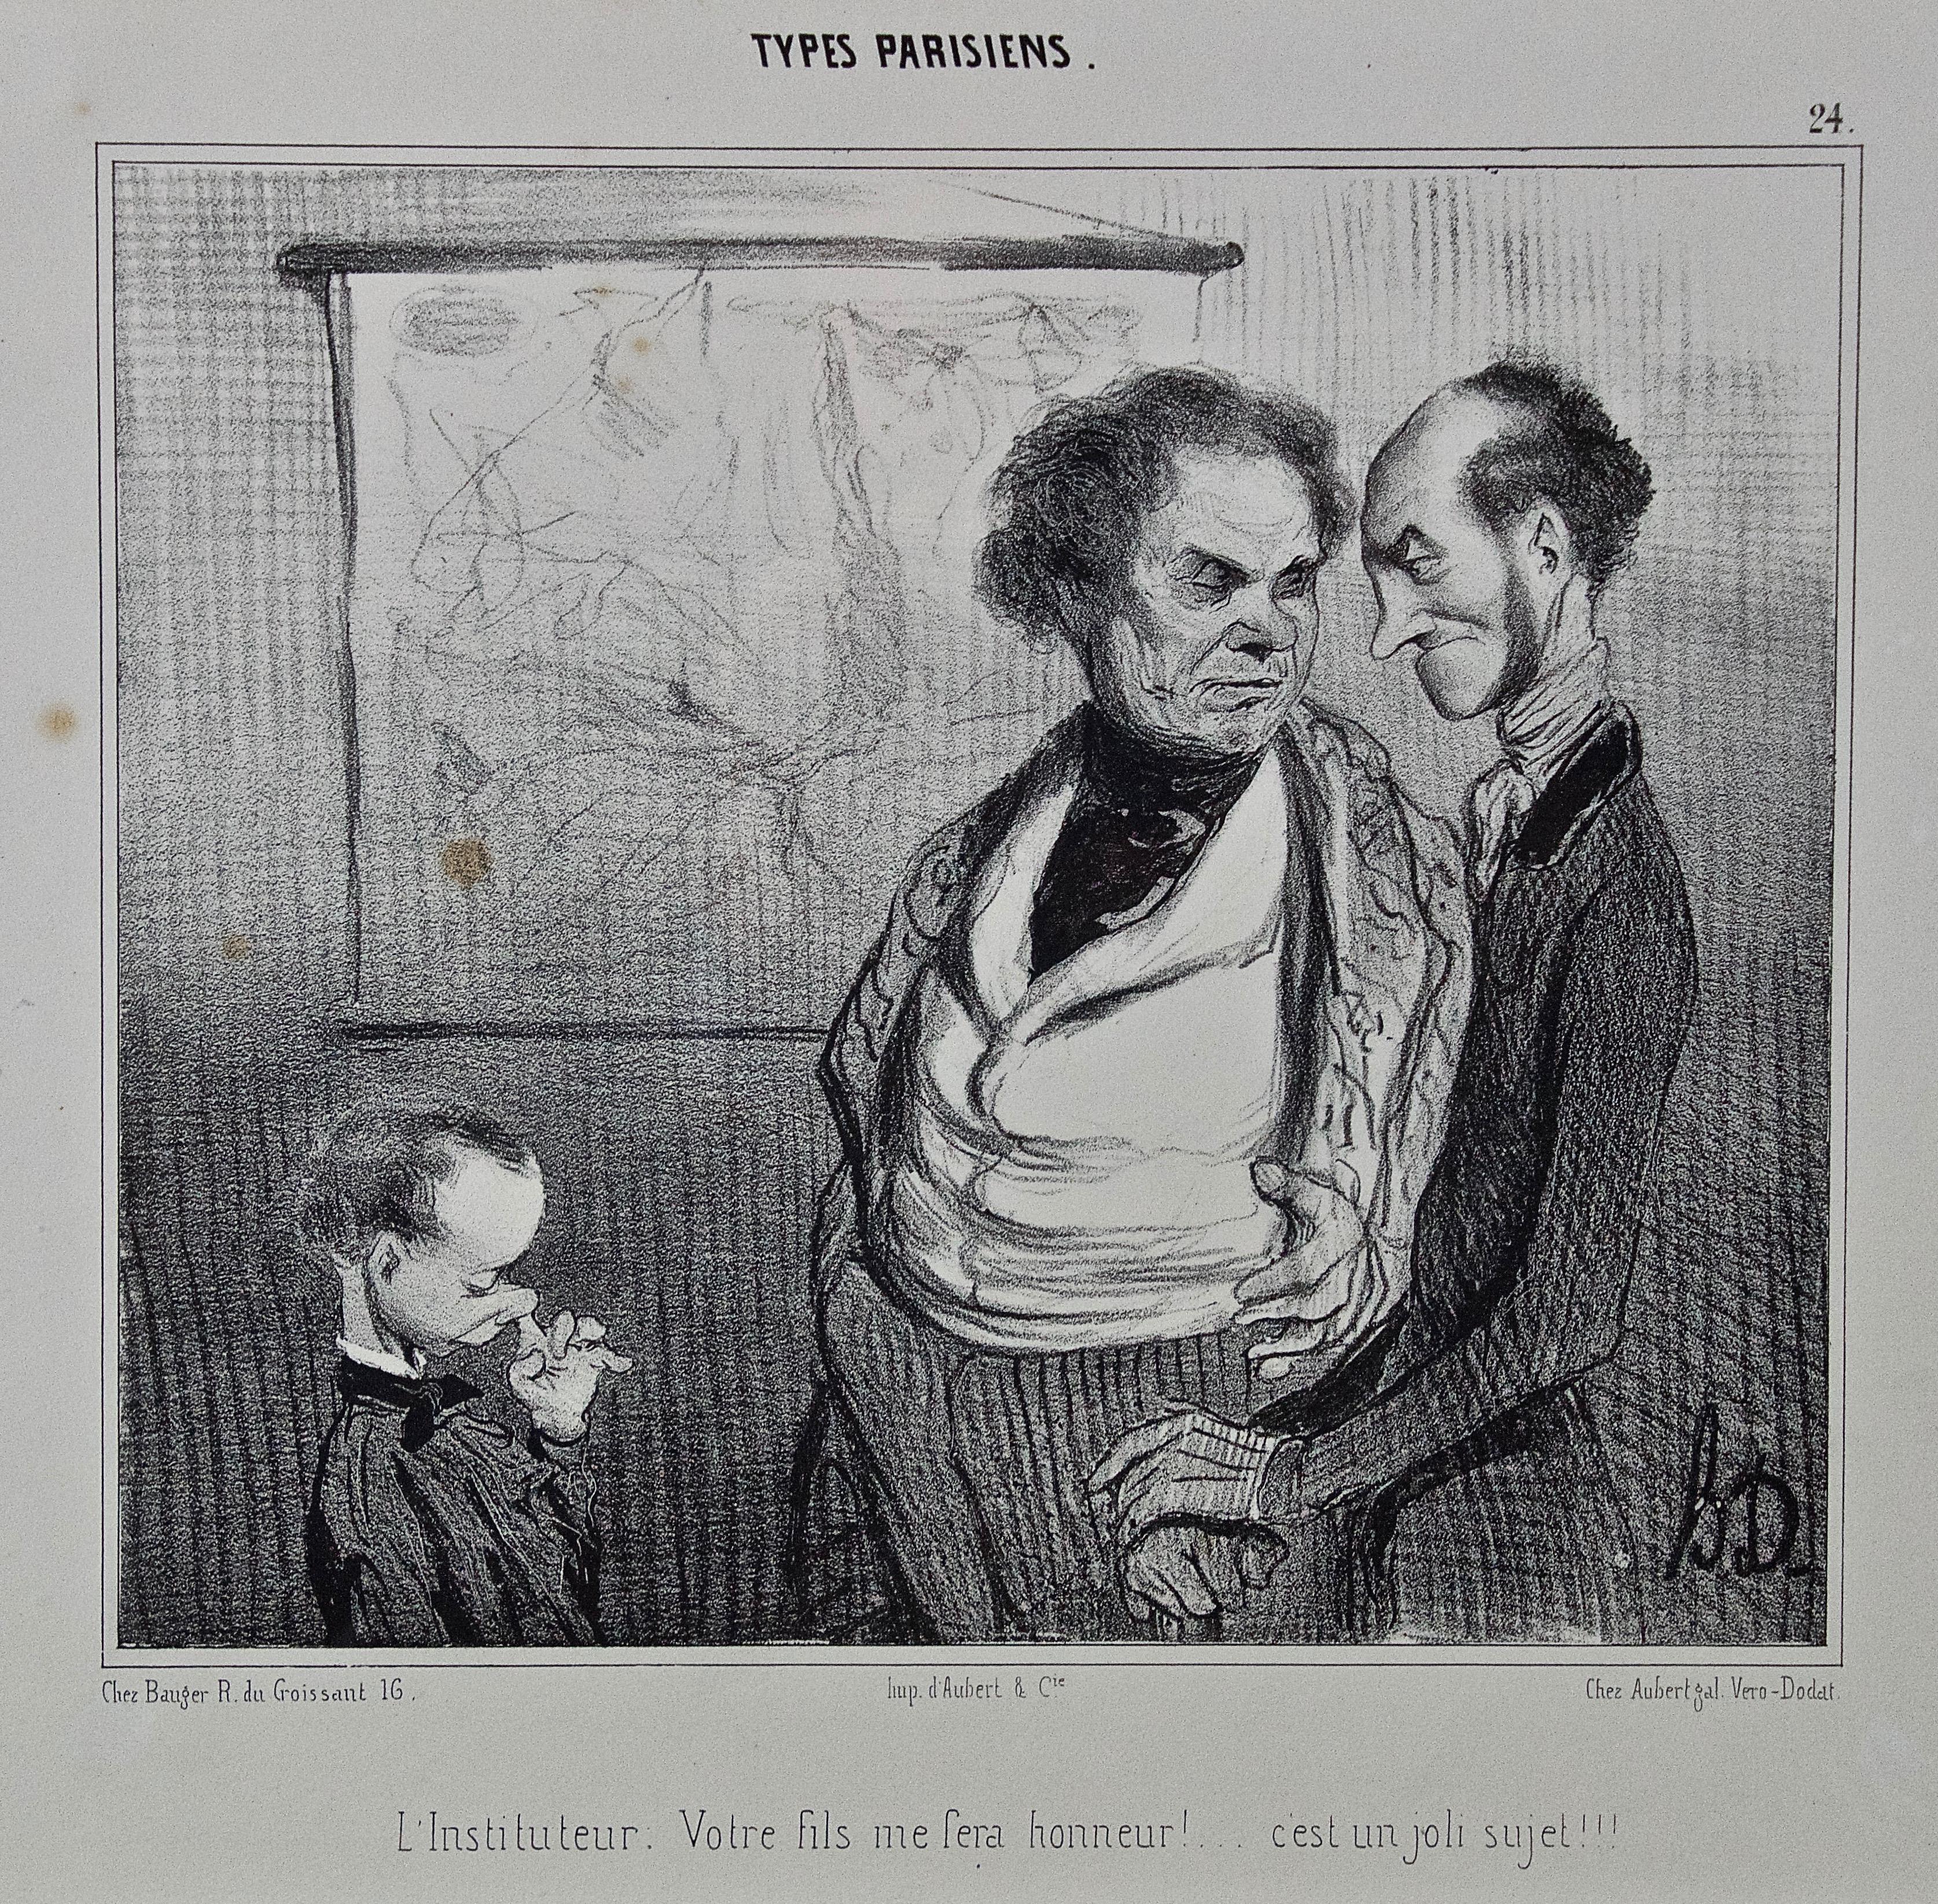 A Rare 19th Century Honore Daumier Caricature from the 